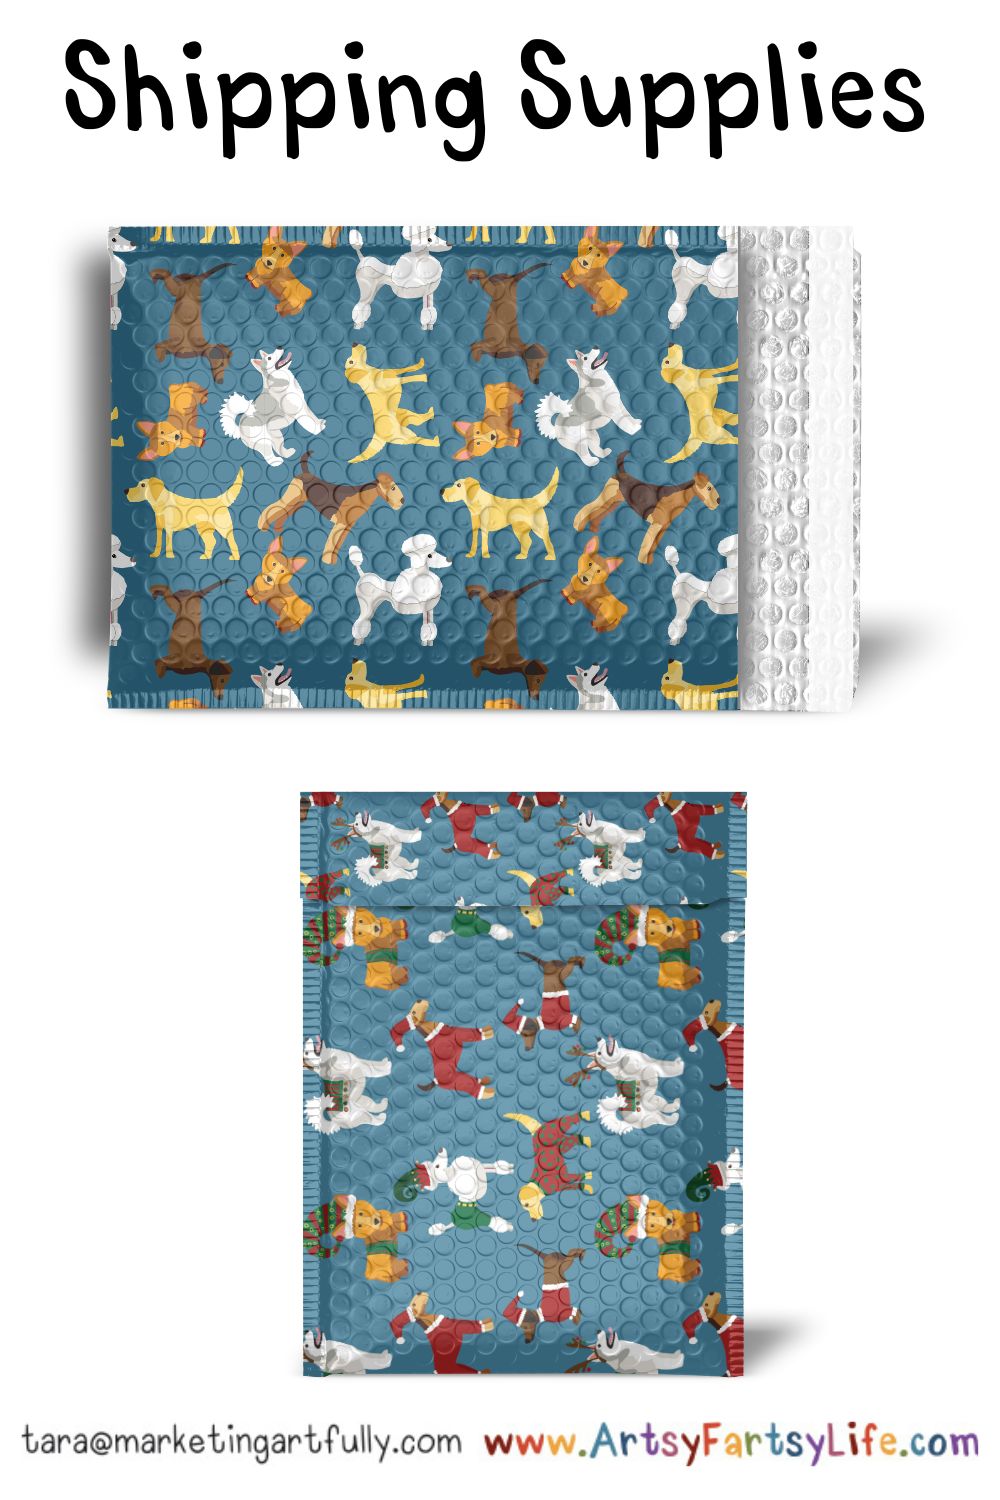 Everyday Dogs 1 Surface Design For Shipping Supplies